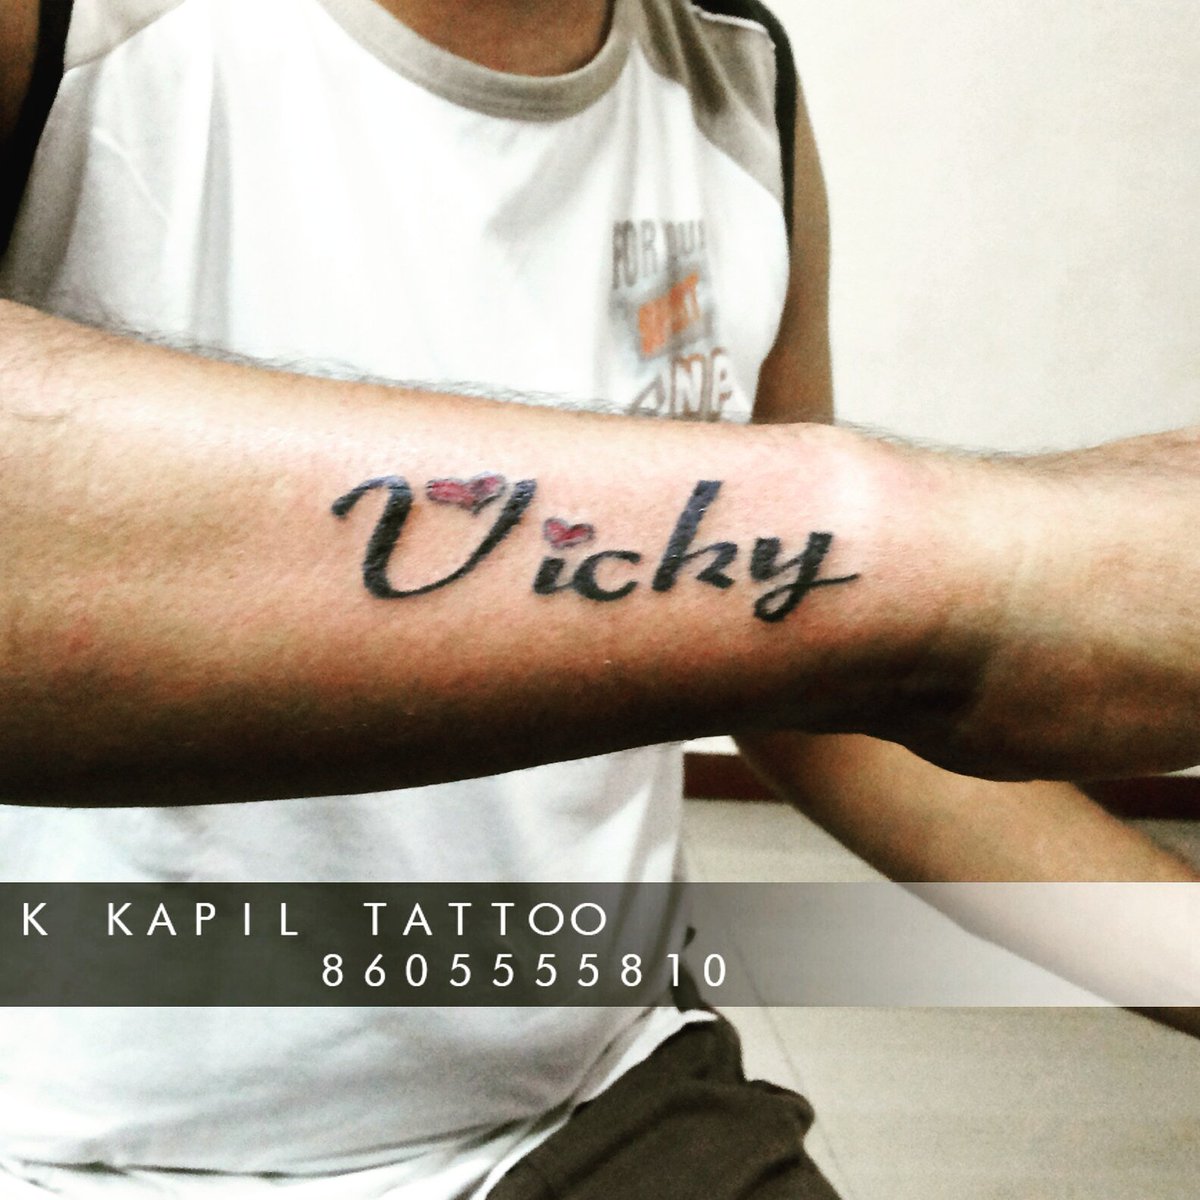 Vicky Name Tattoo.. Tattoo Shop in... - Ink Heart Tattoos | Facebook